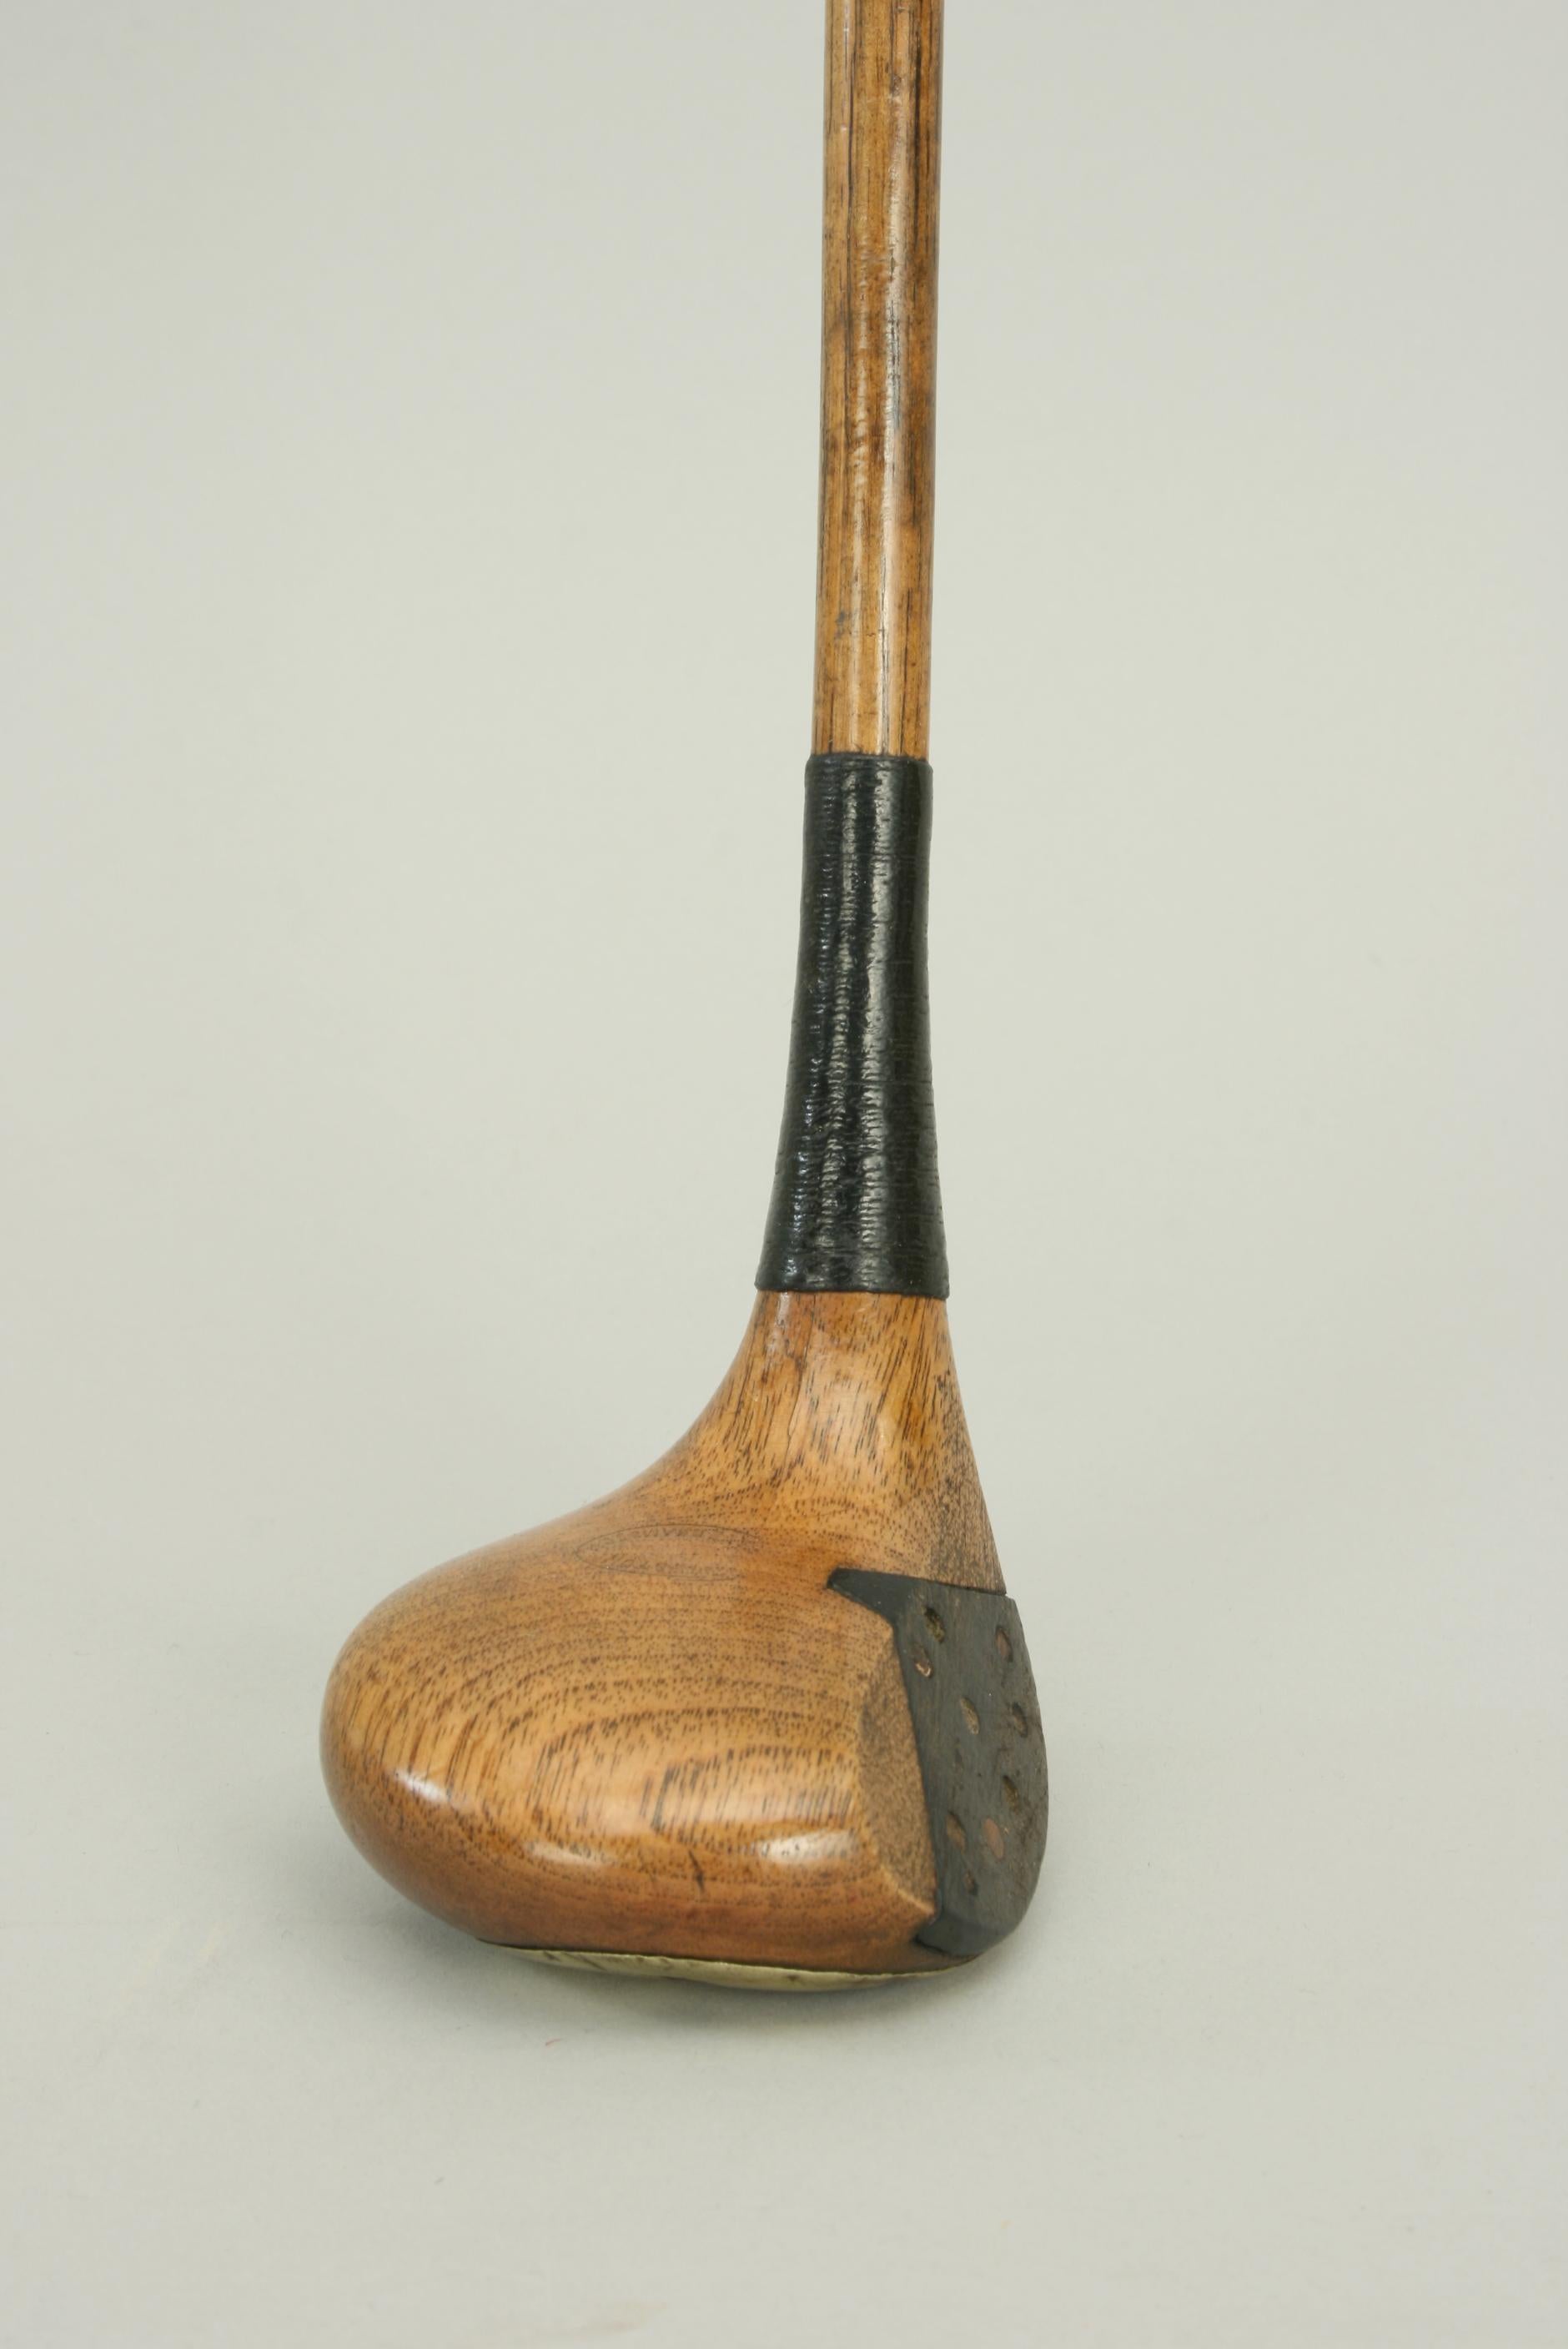 British Antique Hickory Golf Club, Brassie with Face Insert and Brass Sole Plate